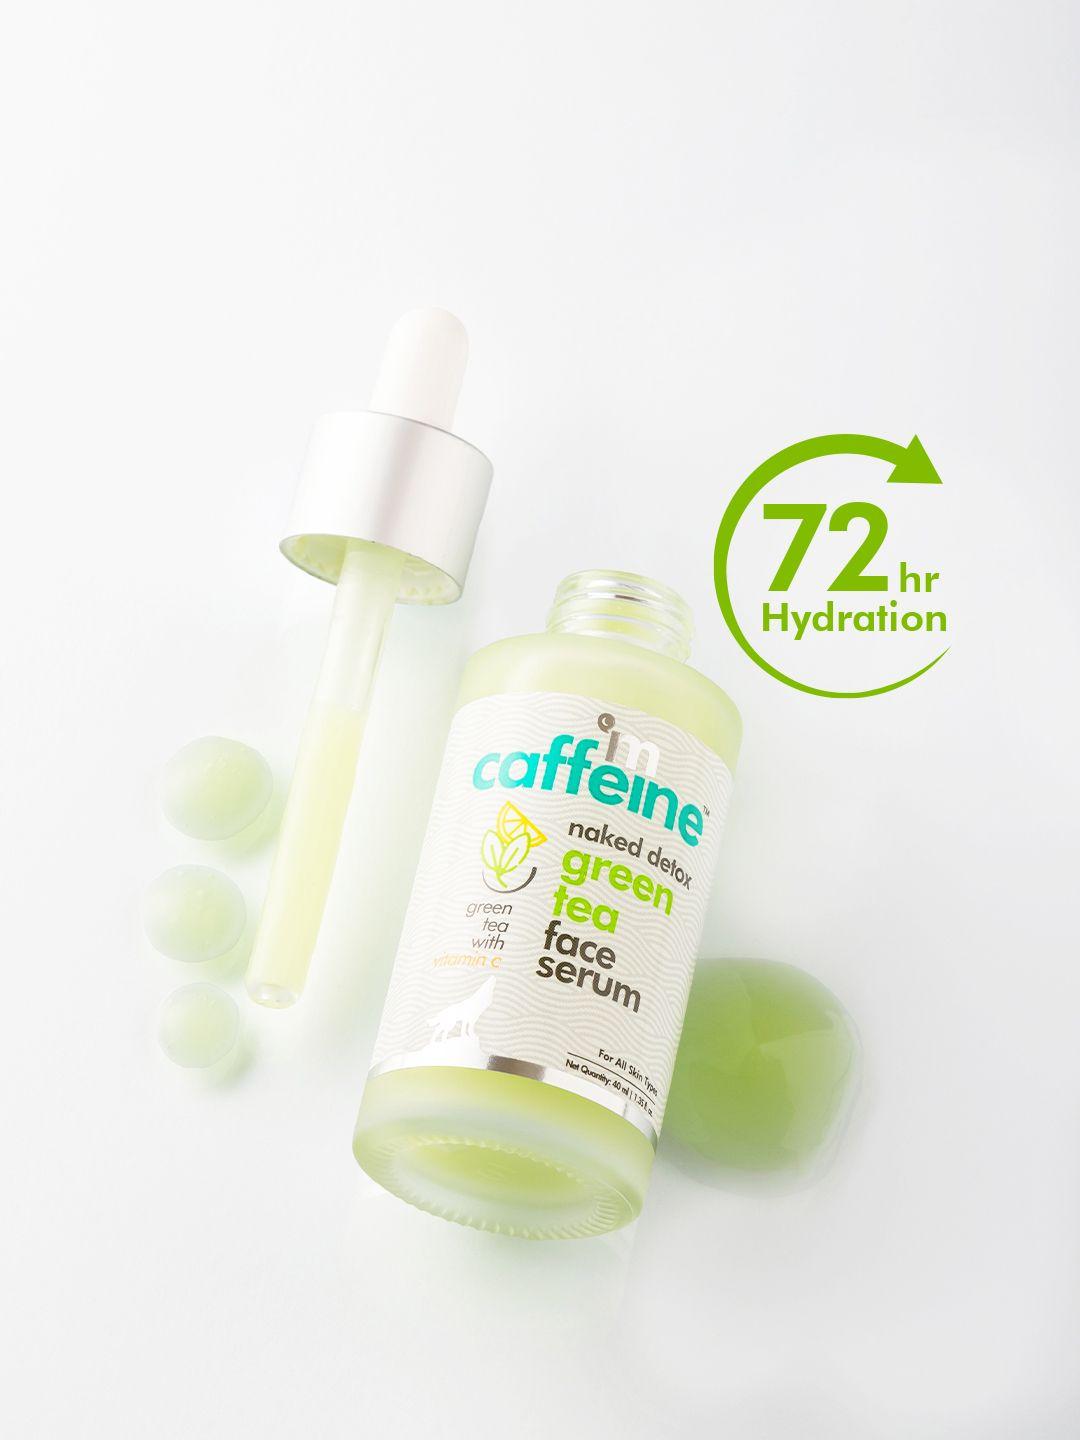 mcaffeine sustainable vitamin c green tea face serum for glowing skin with hyaluronic acid - 40ml